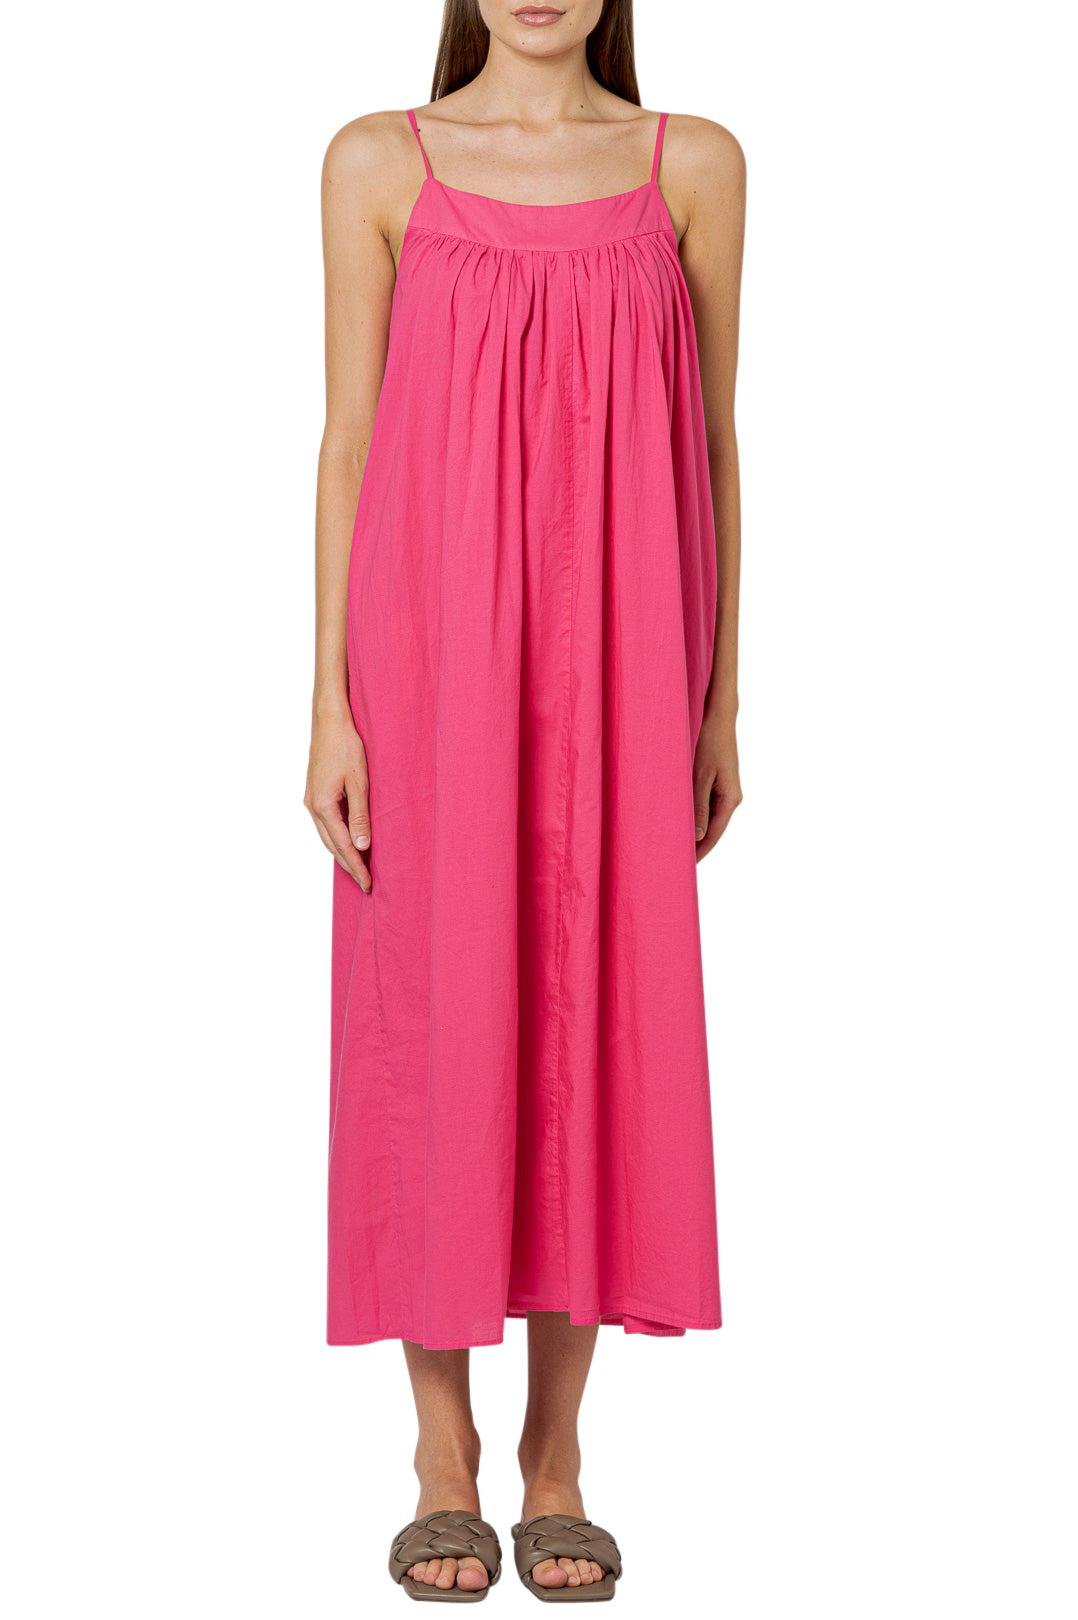 Missing You Already-Pleated long dress-dgallerystore